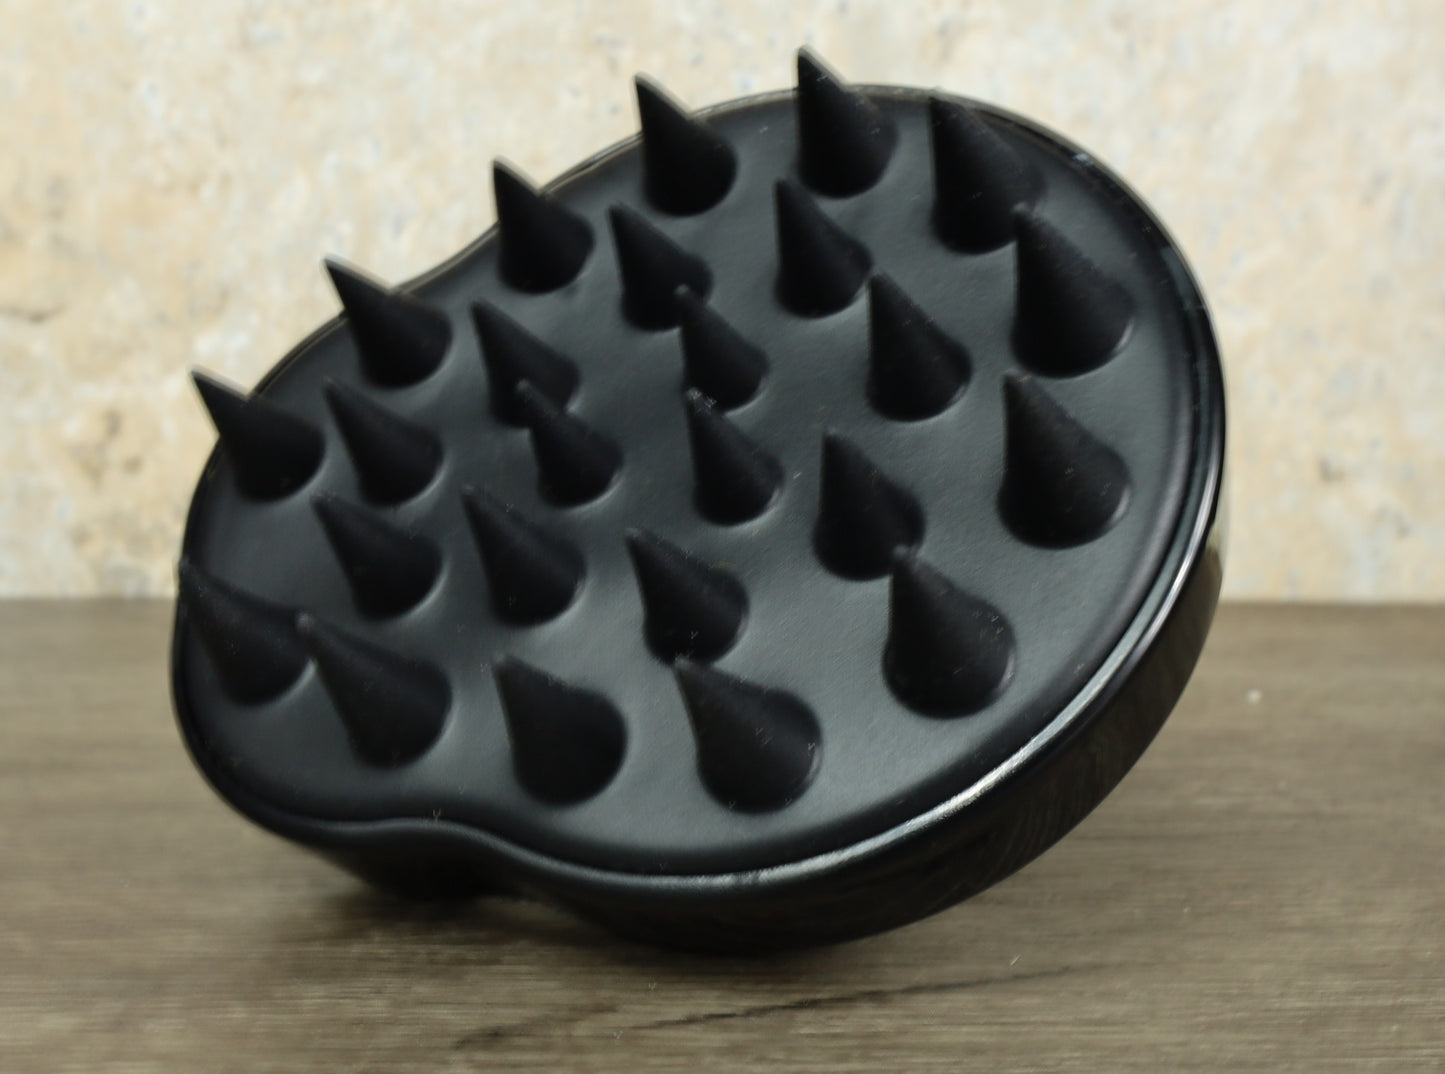 Ca'Mora hair and scalp massager, free gift with 90 day supply purchase